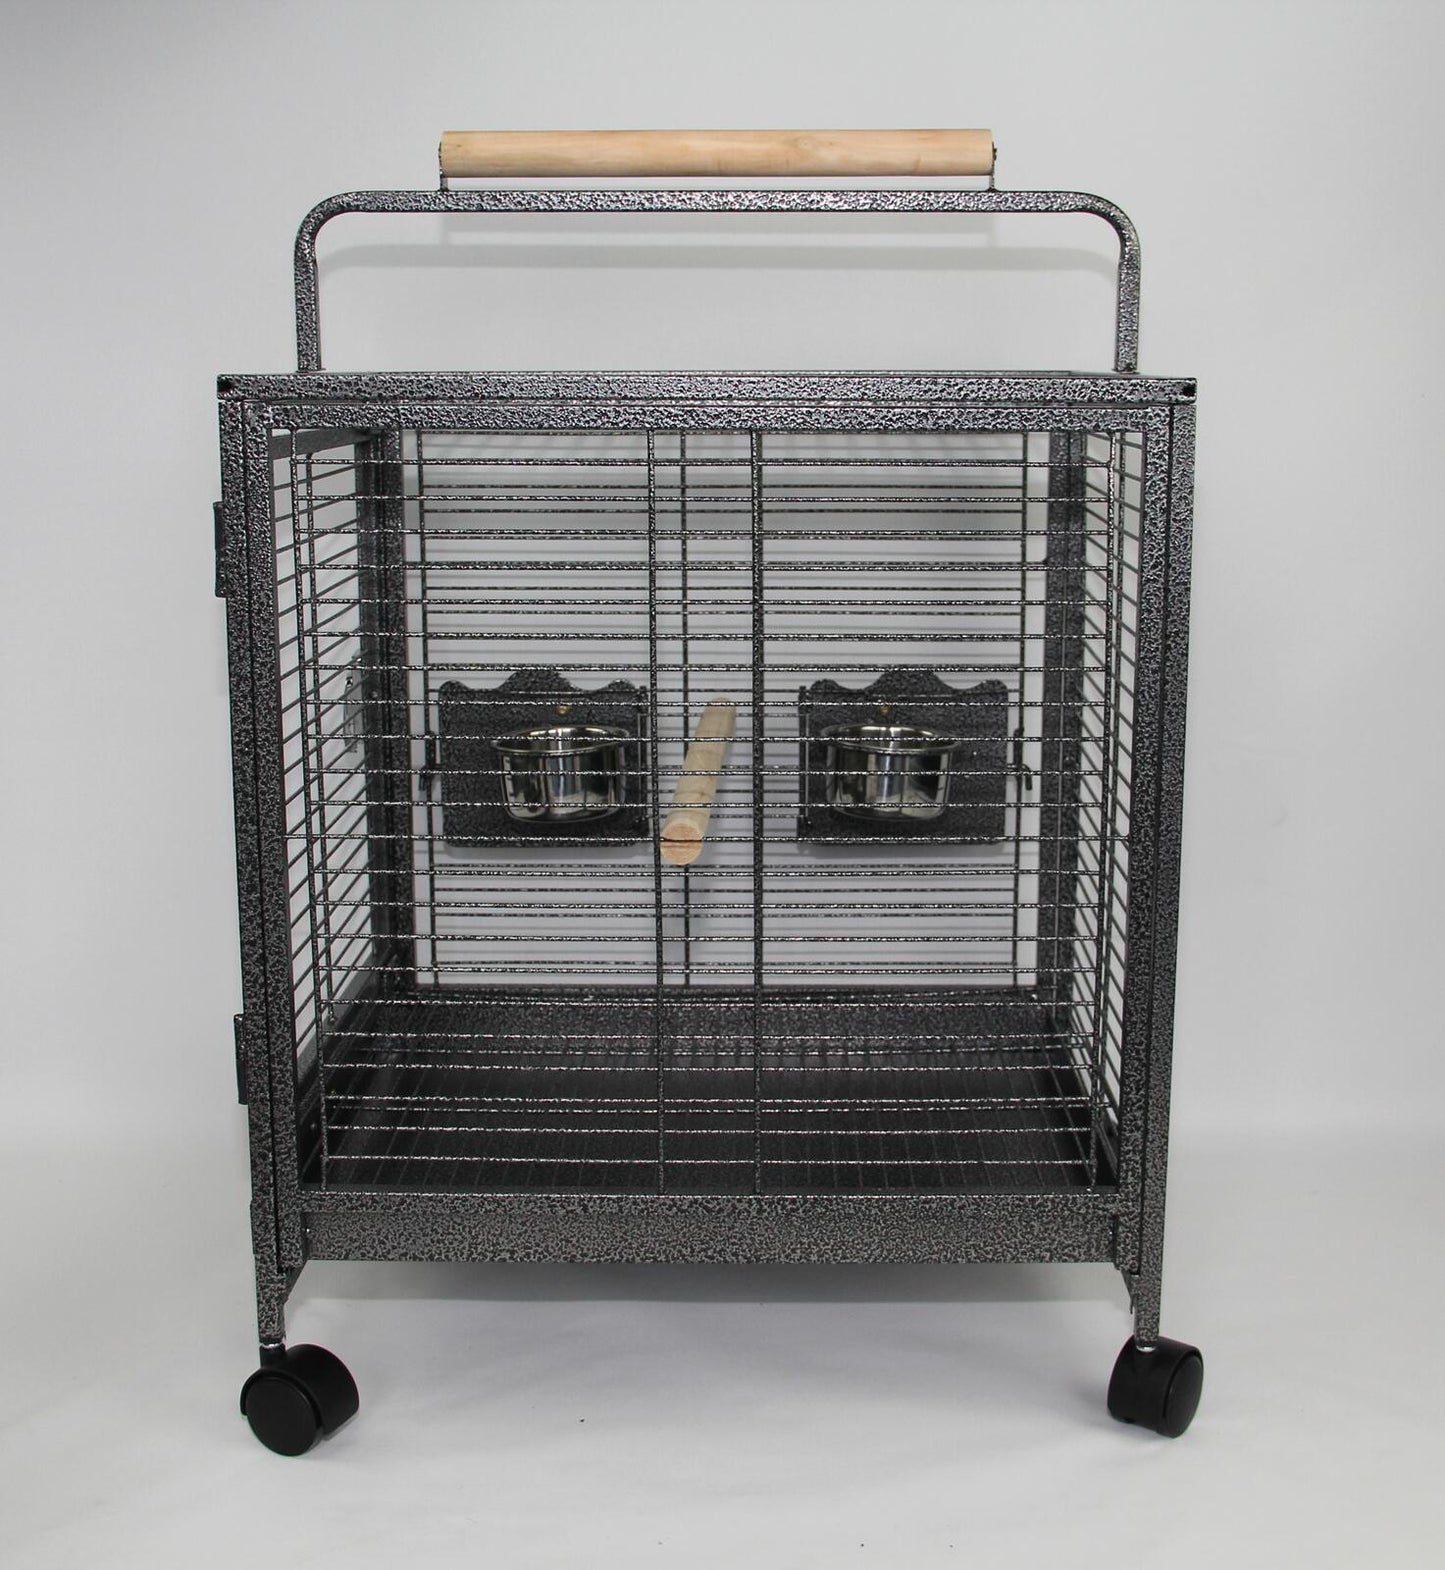 Small Bird Transport Budgie Cage Parrot Aviary Carrier With Wheel